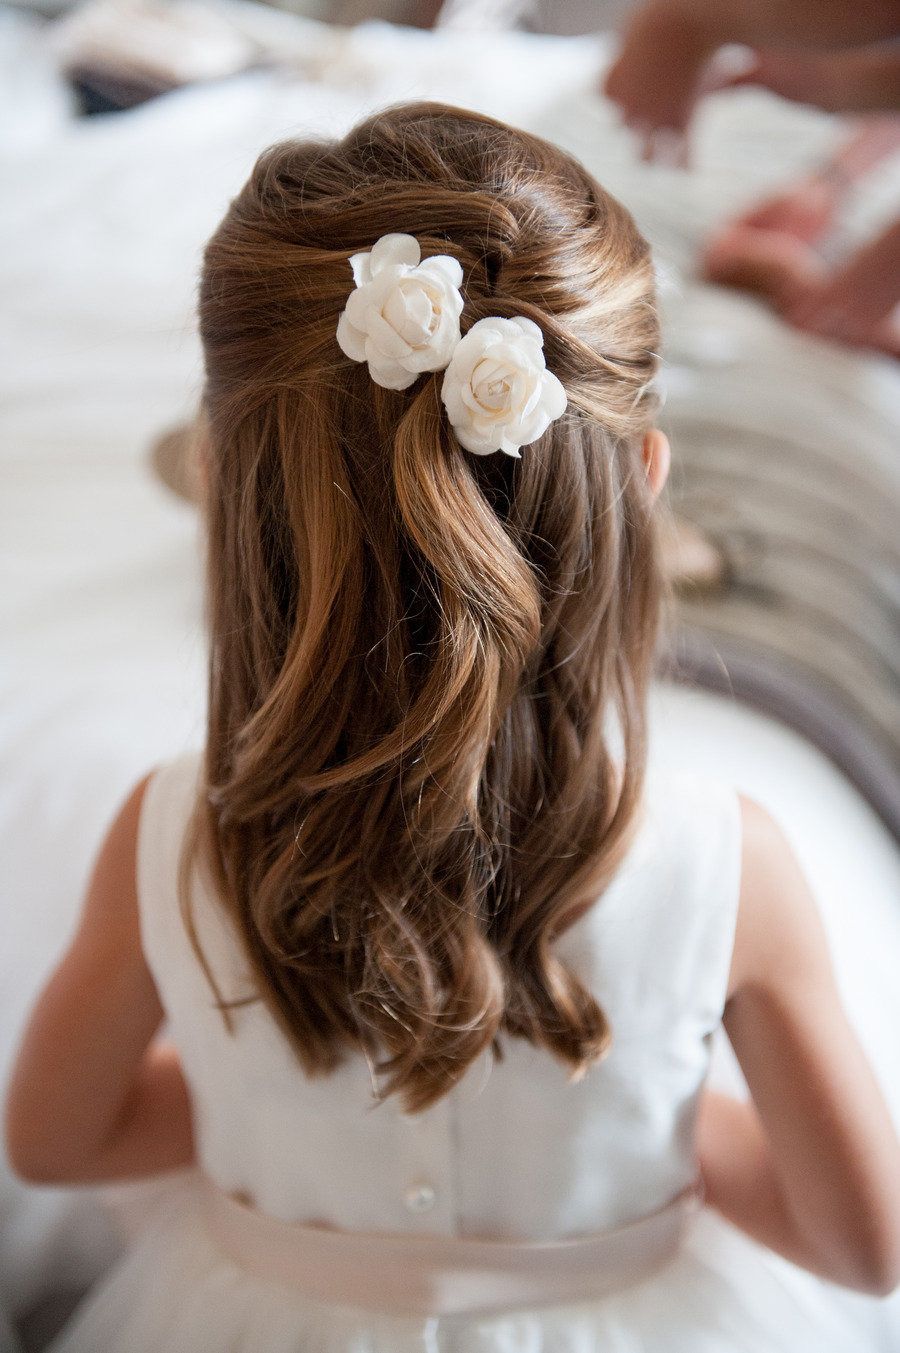 Waterfall Hairstyle with Two Simple White Rose